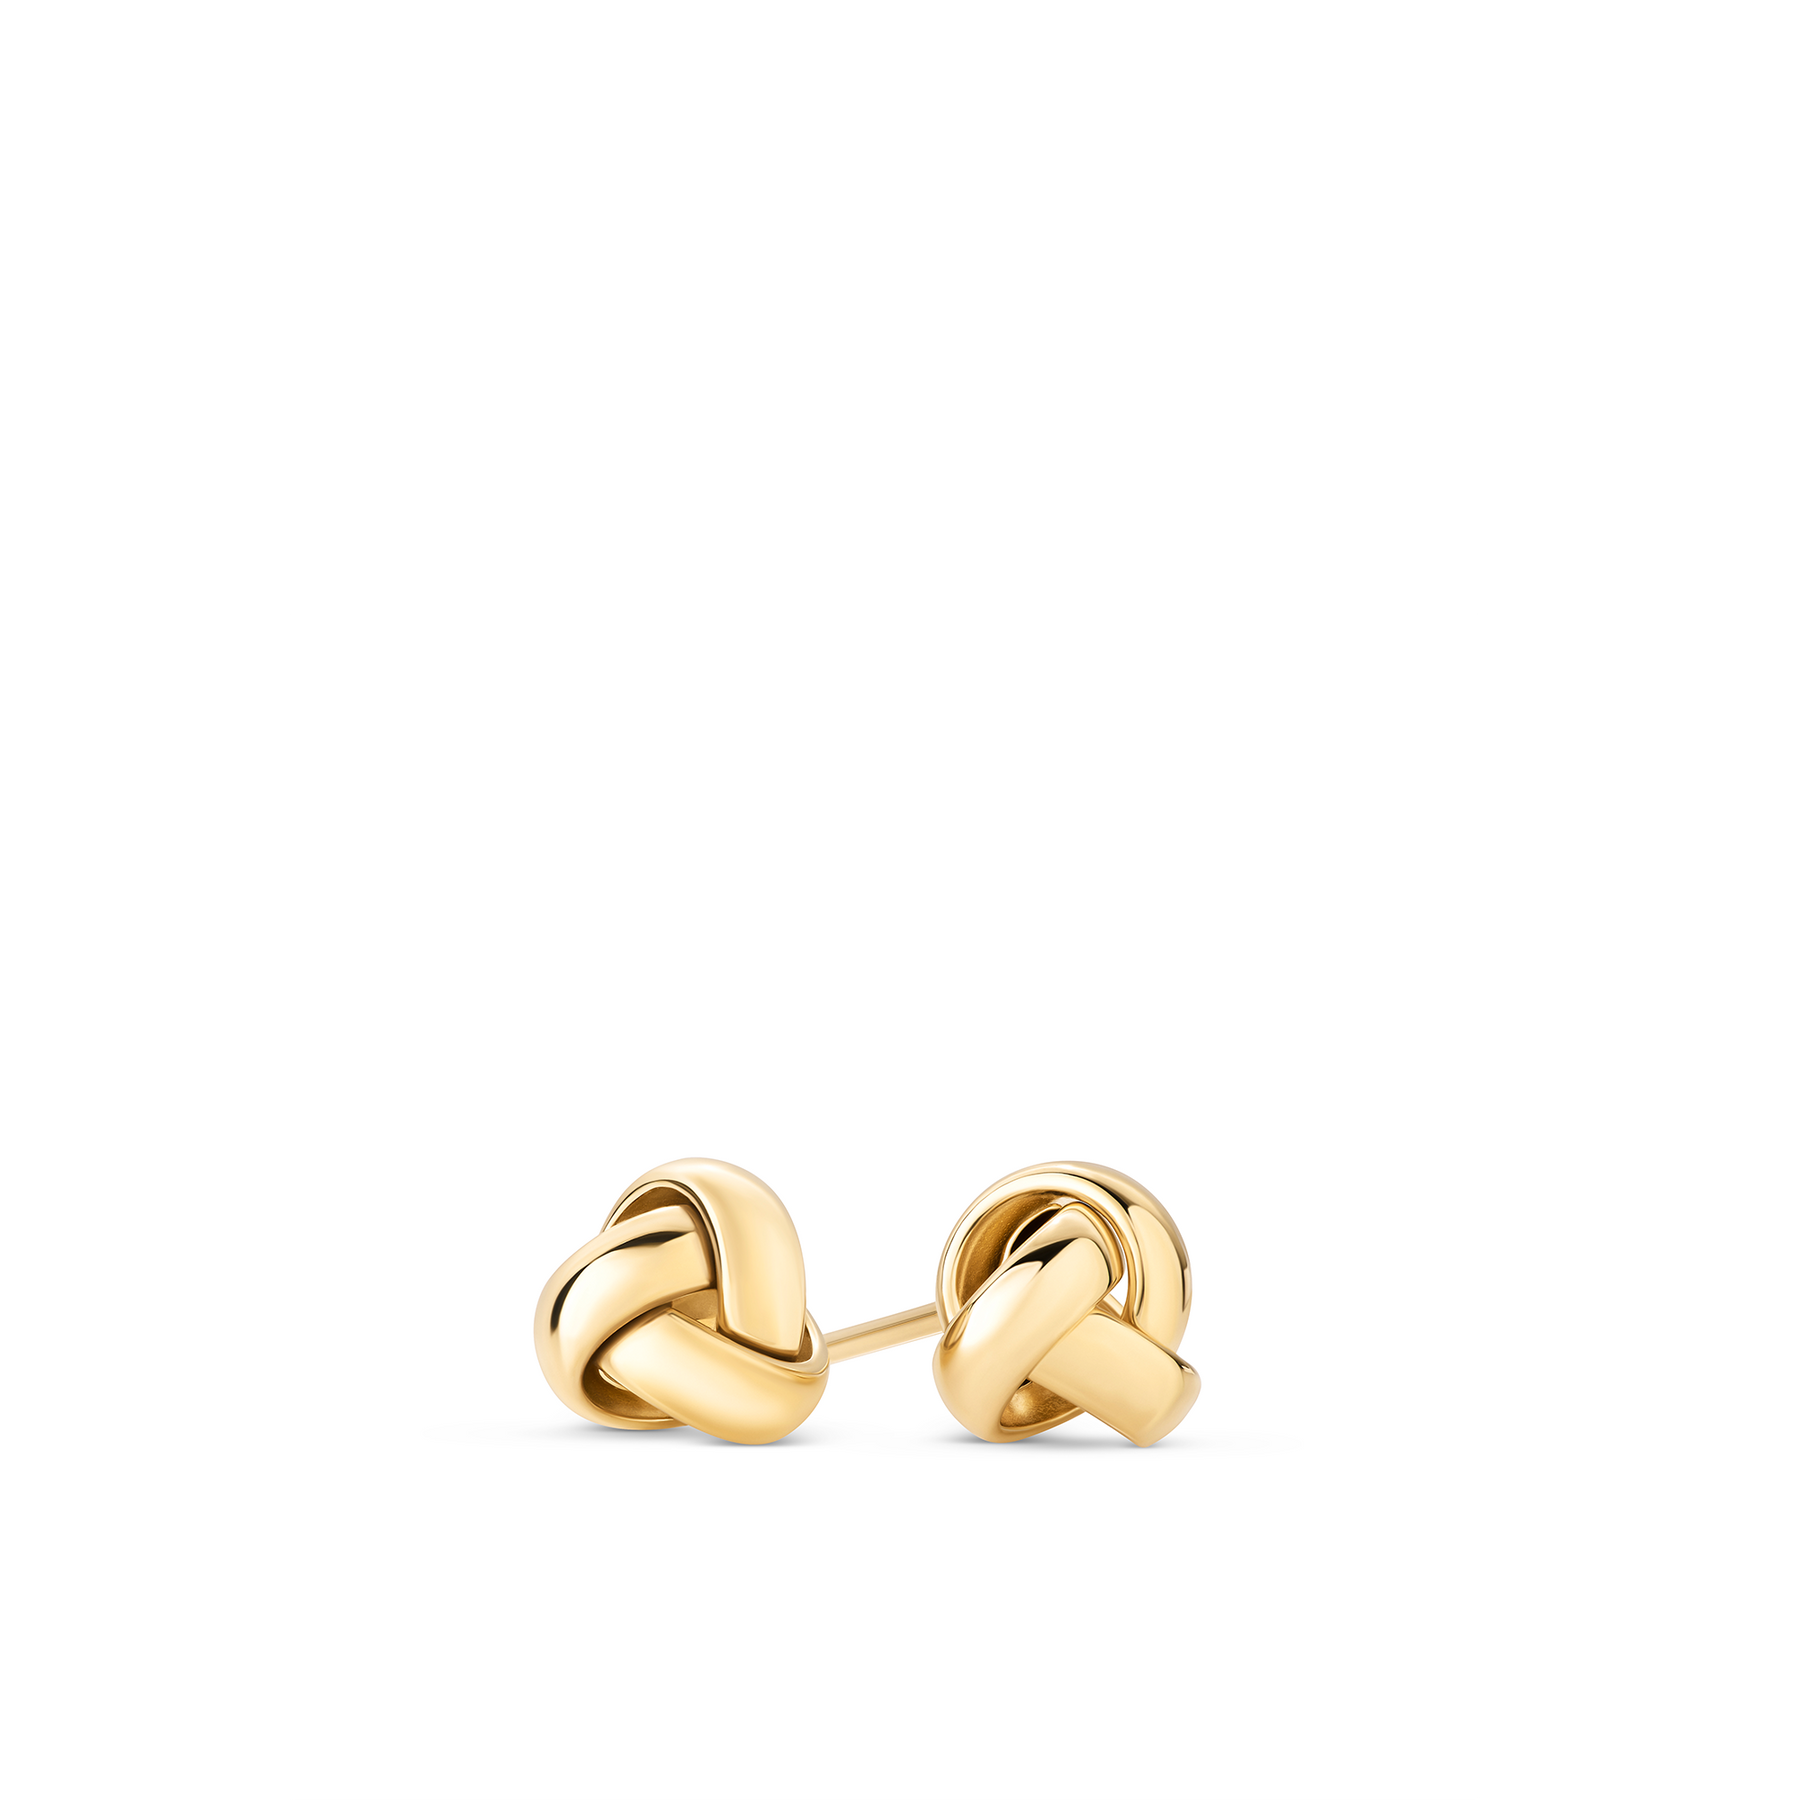 Knot Stud Earrings in 9ct Yellow Gold